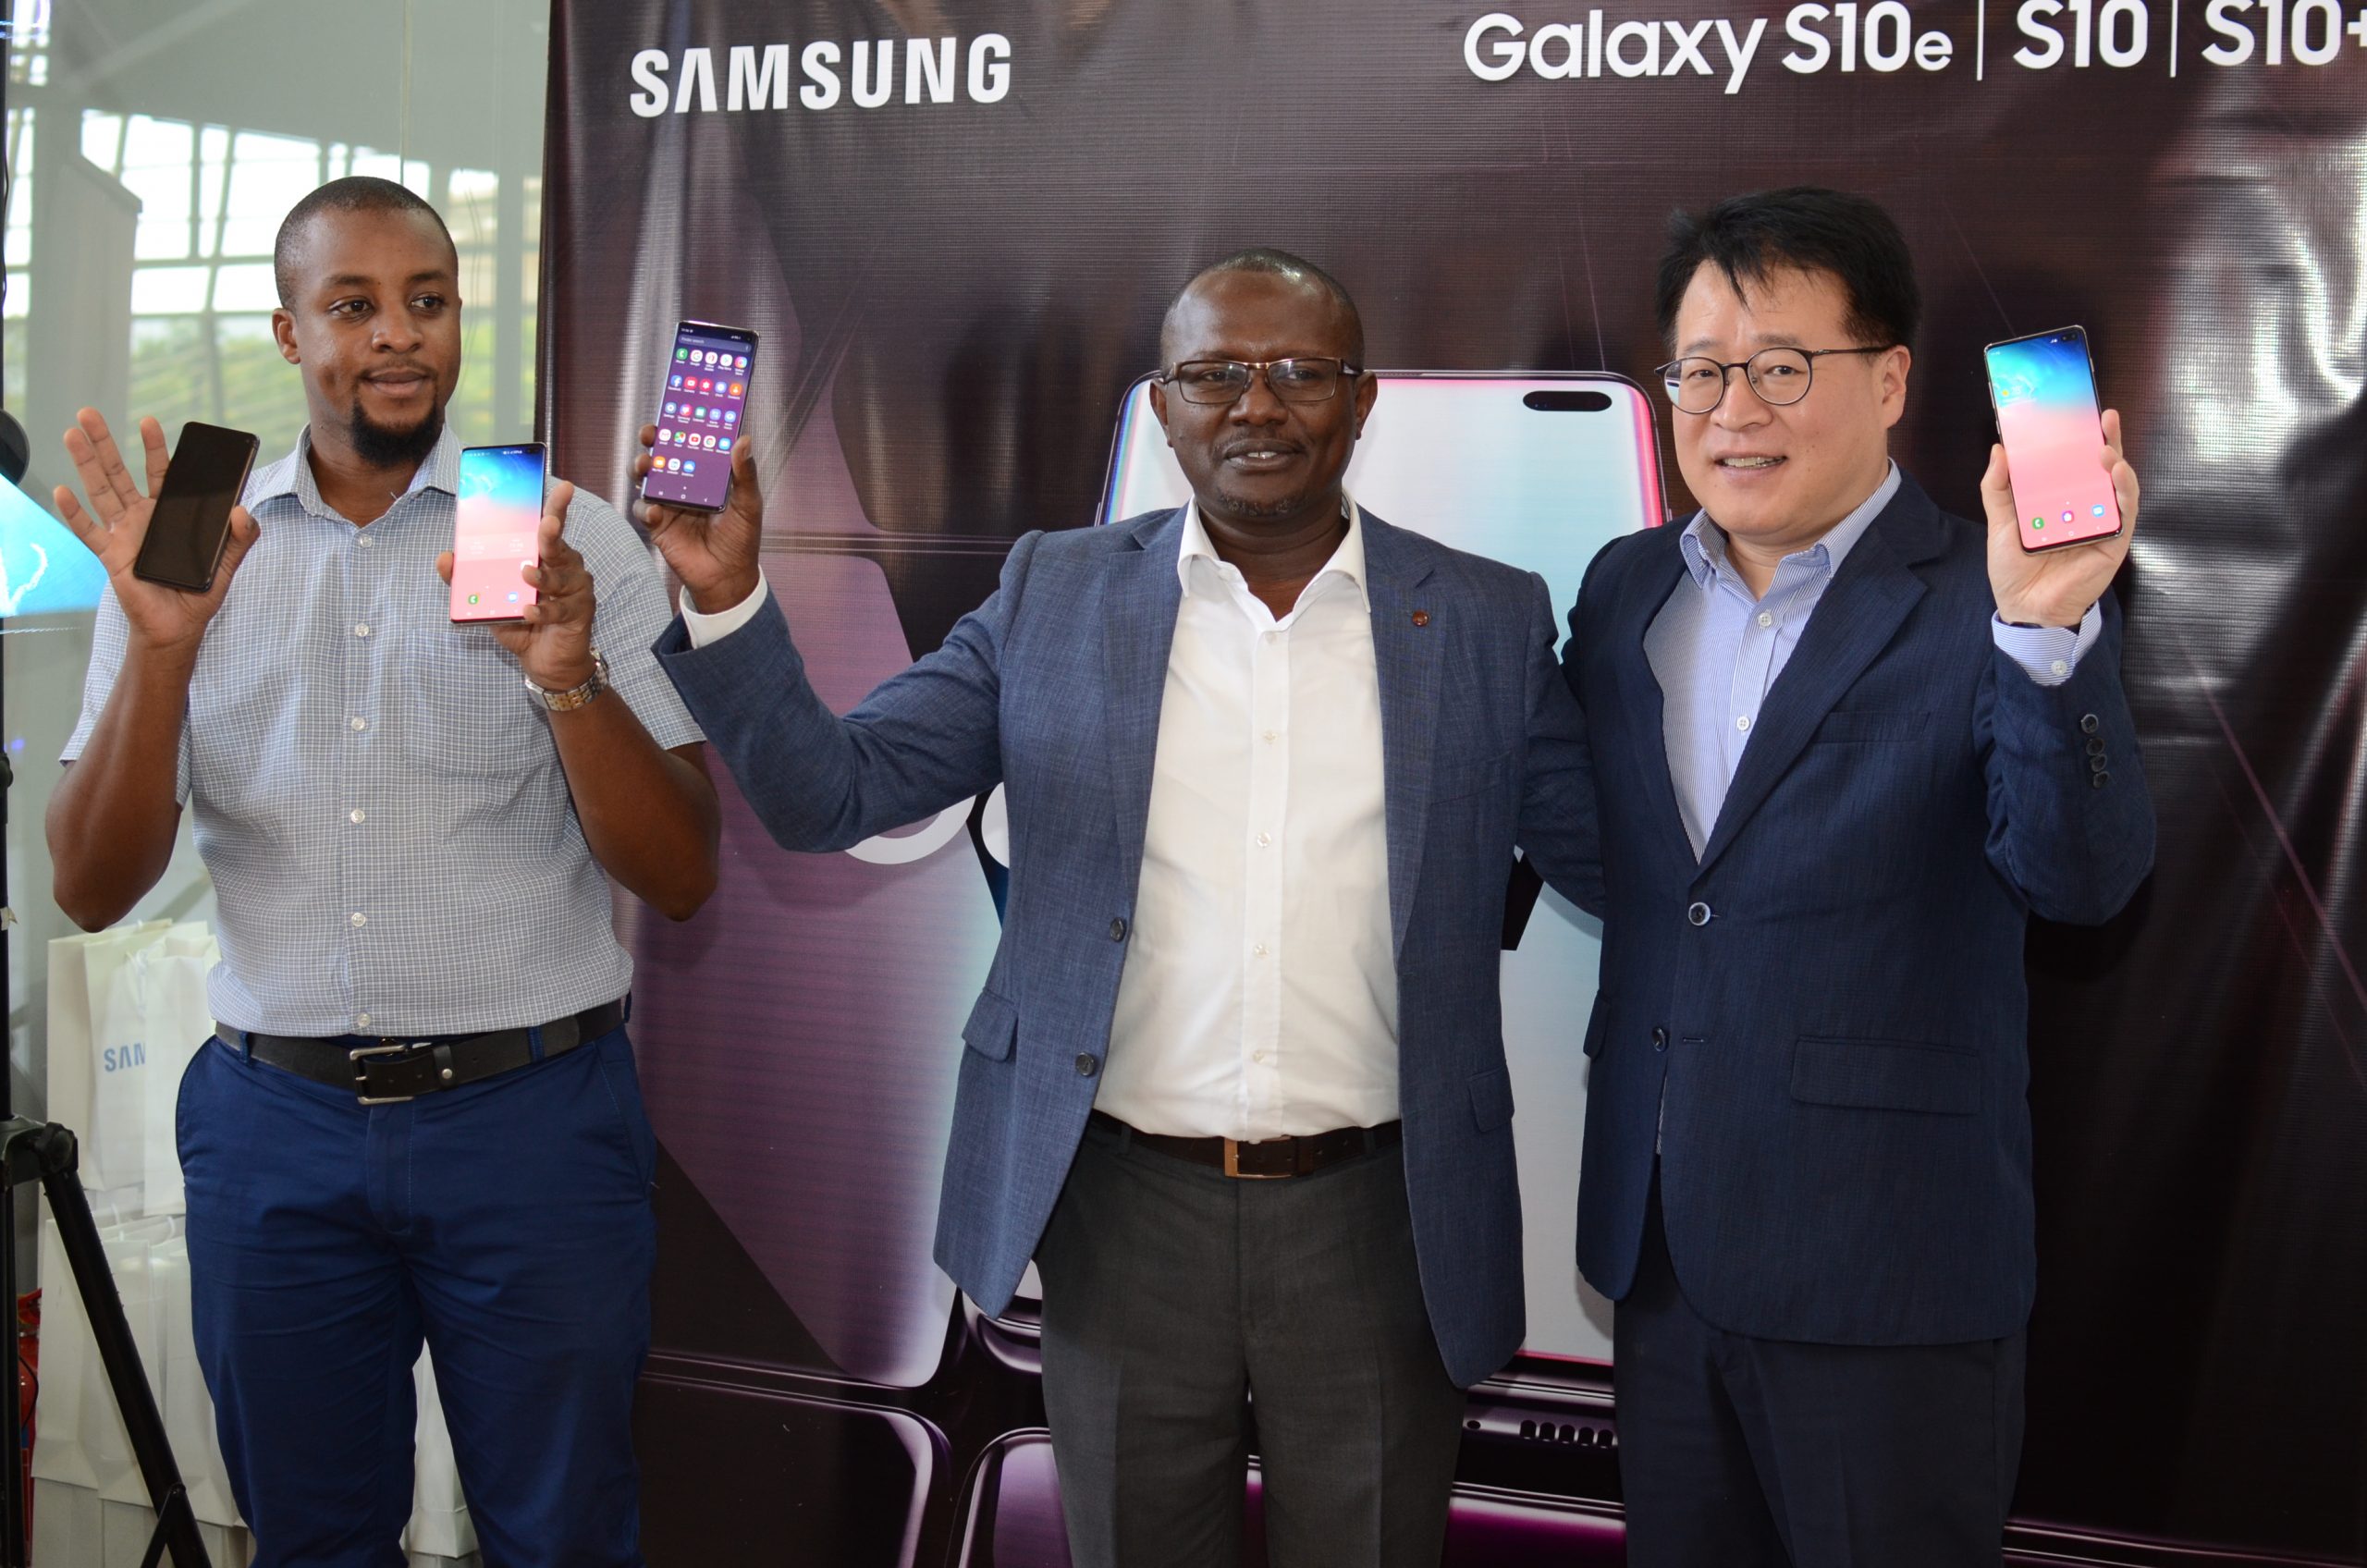 Samsung Galaxy S10 series launches in the Kenya market